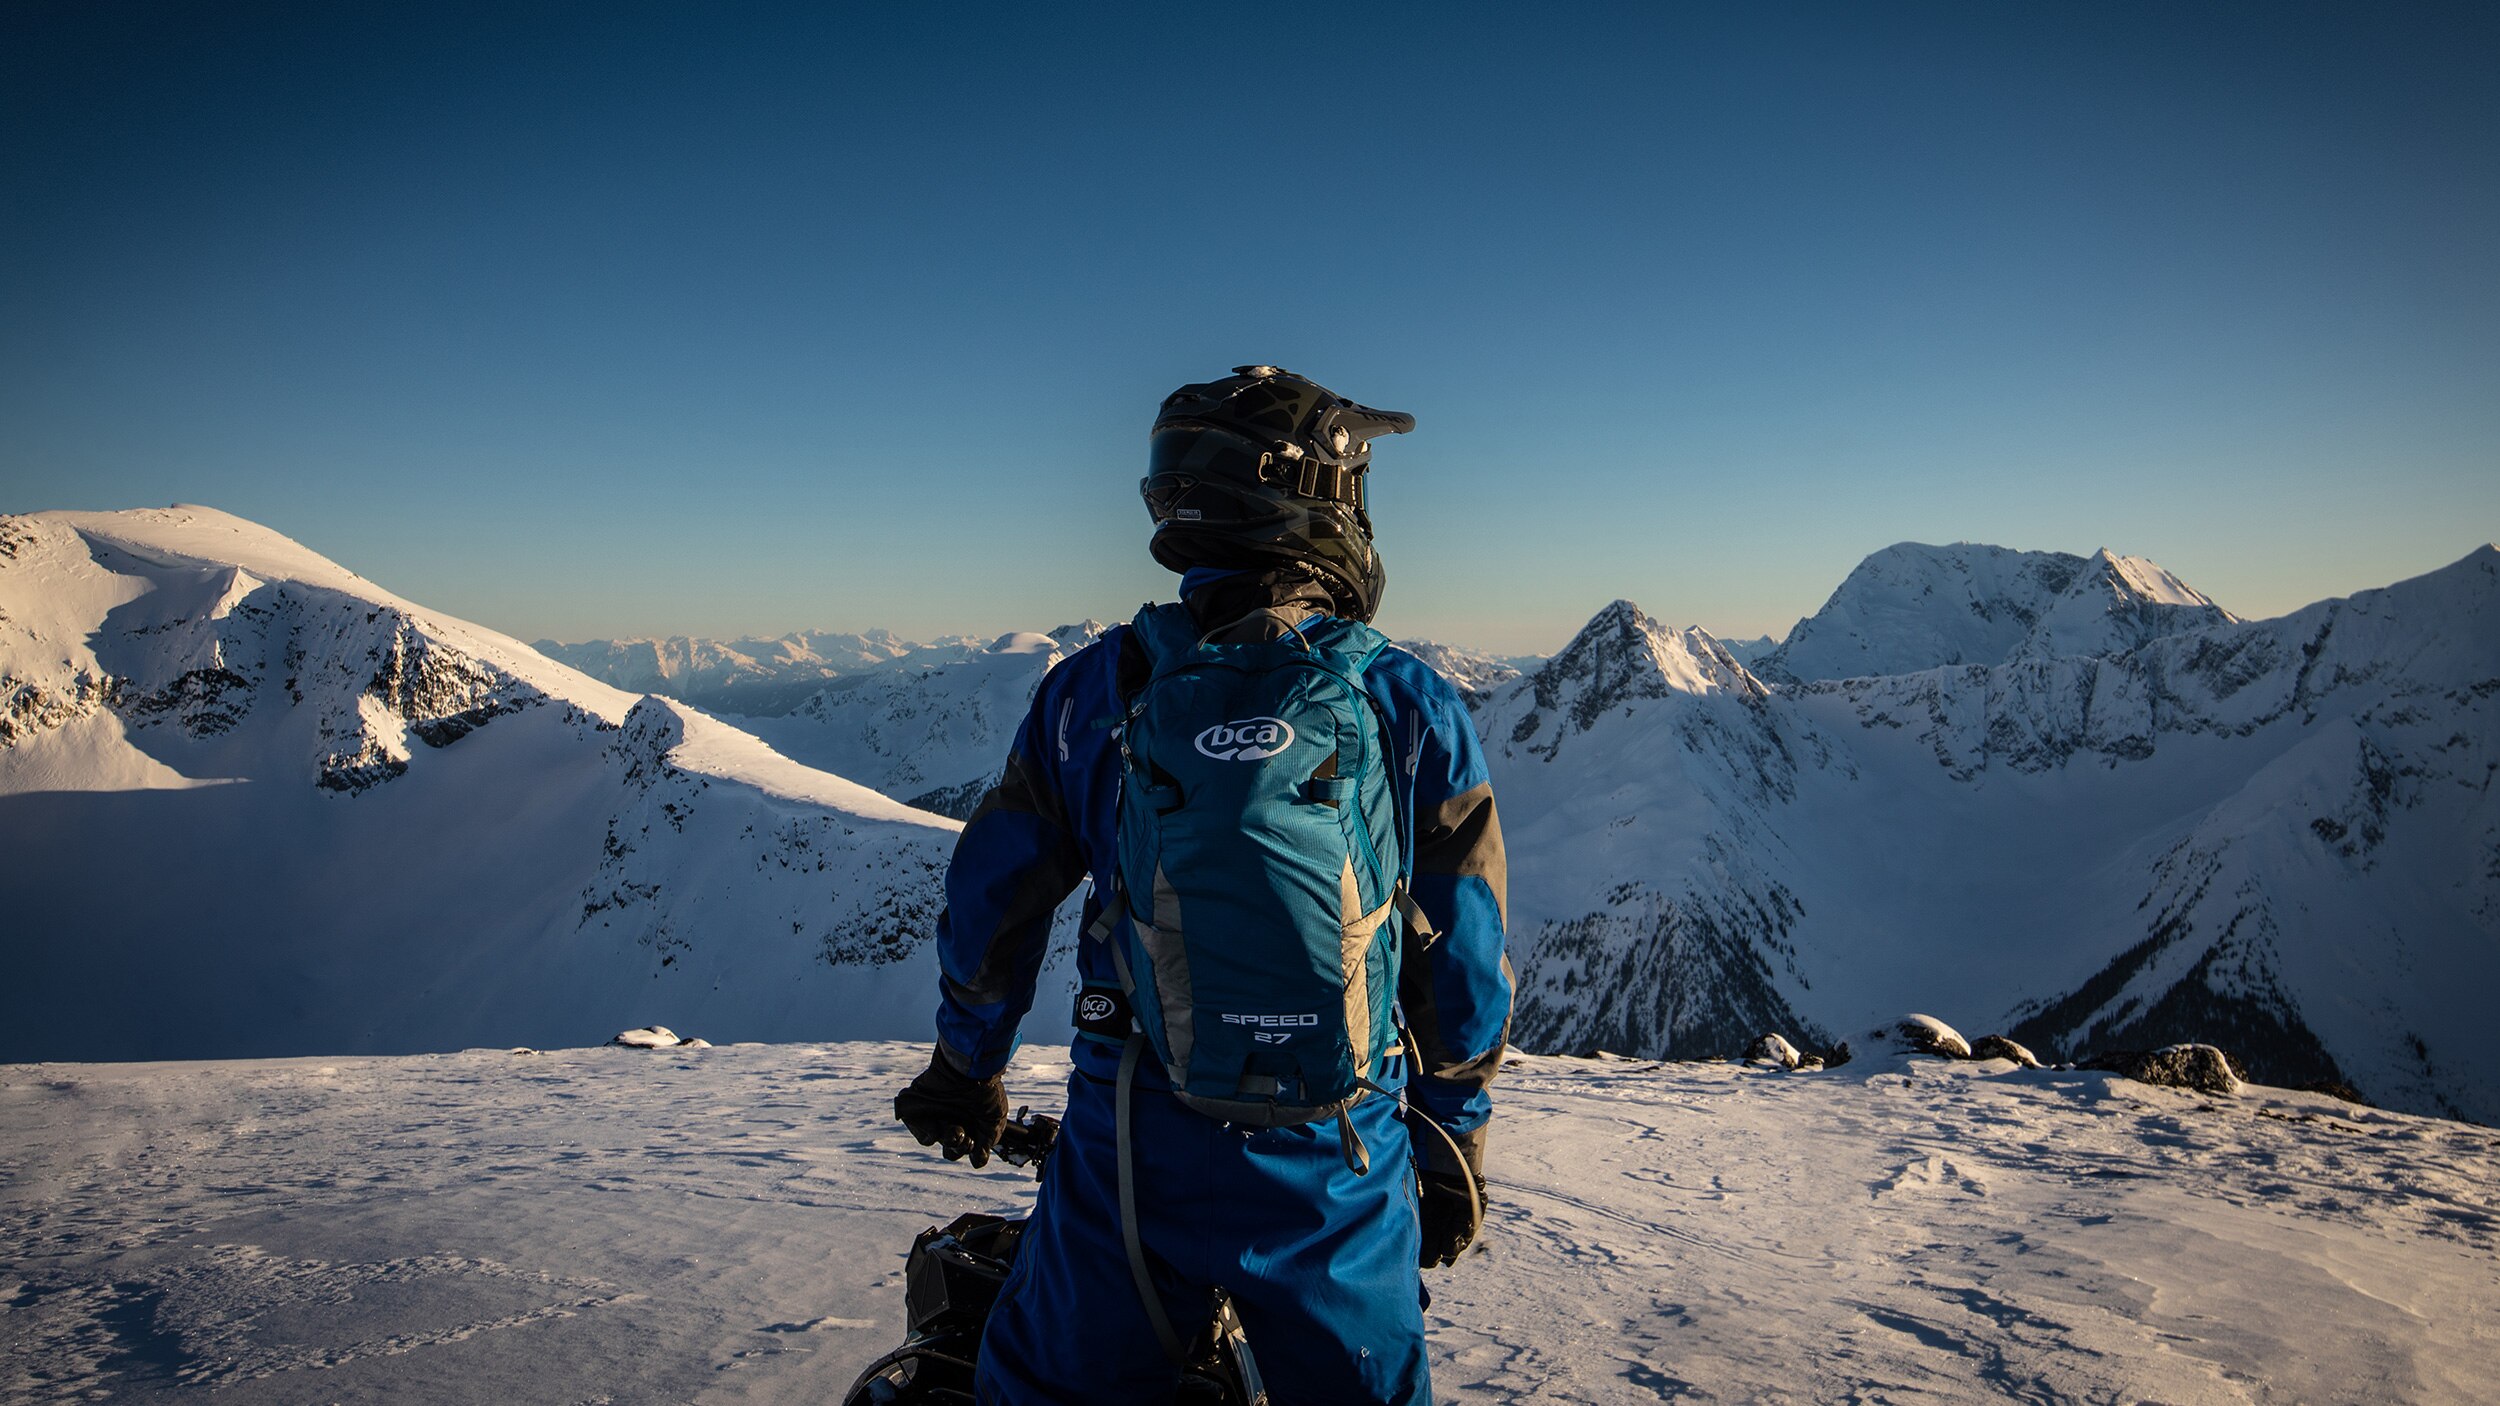 A snowmobiler contemplating the view at the top of a mountain